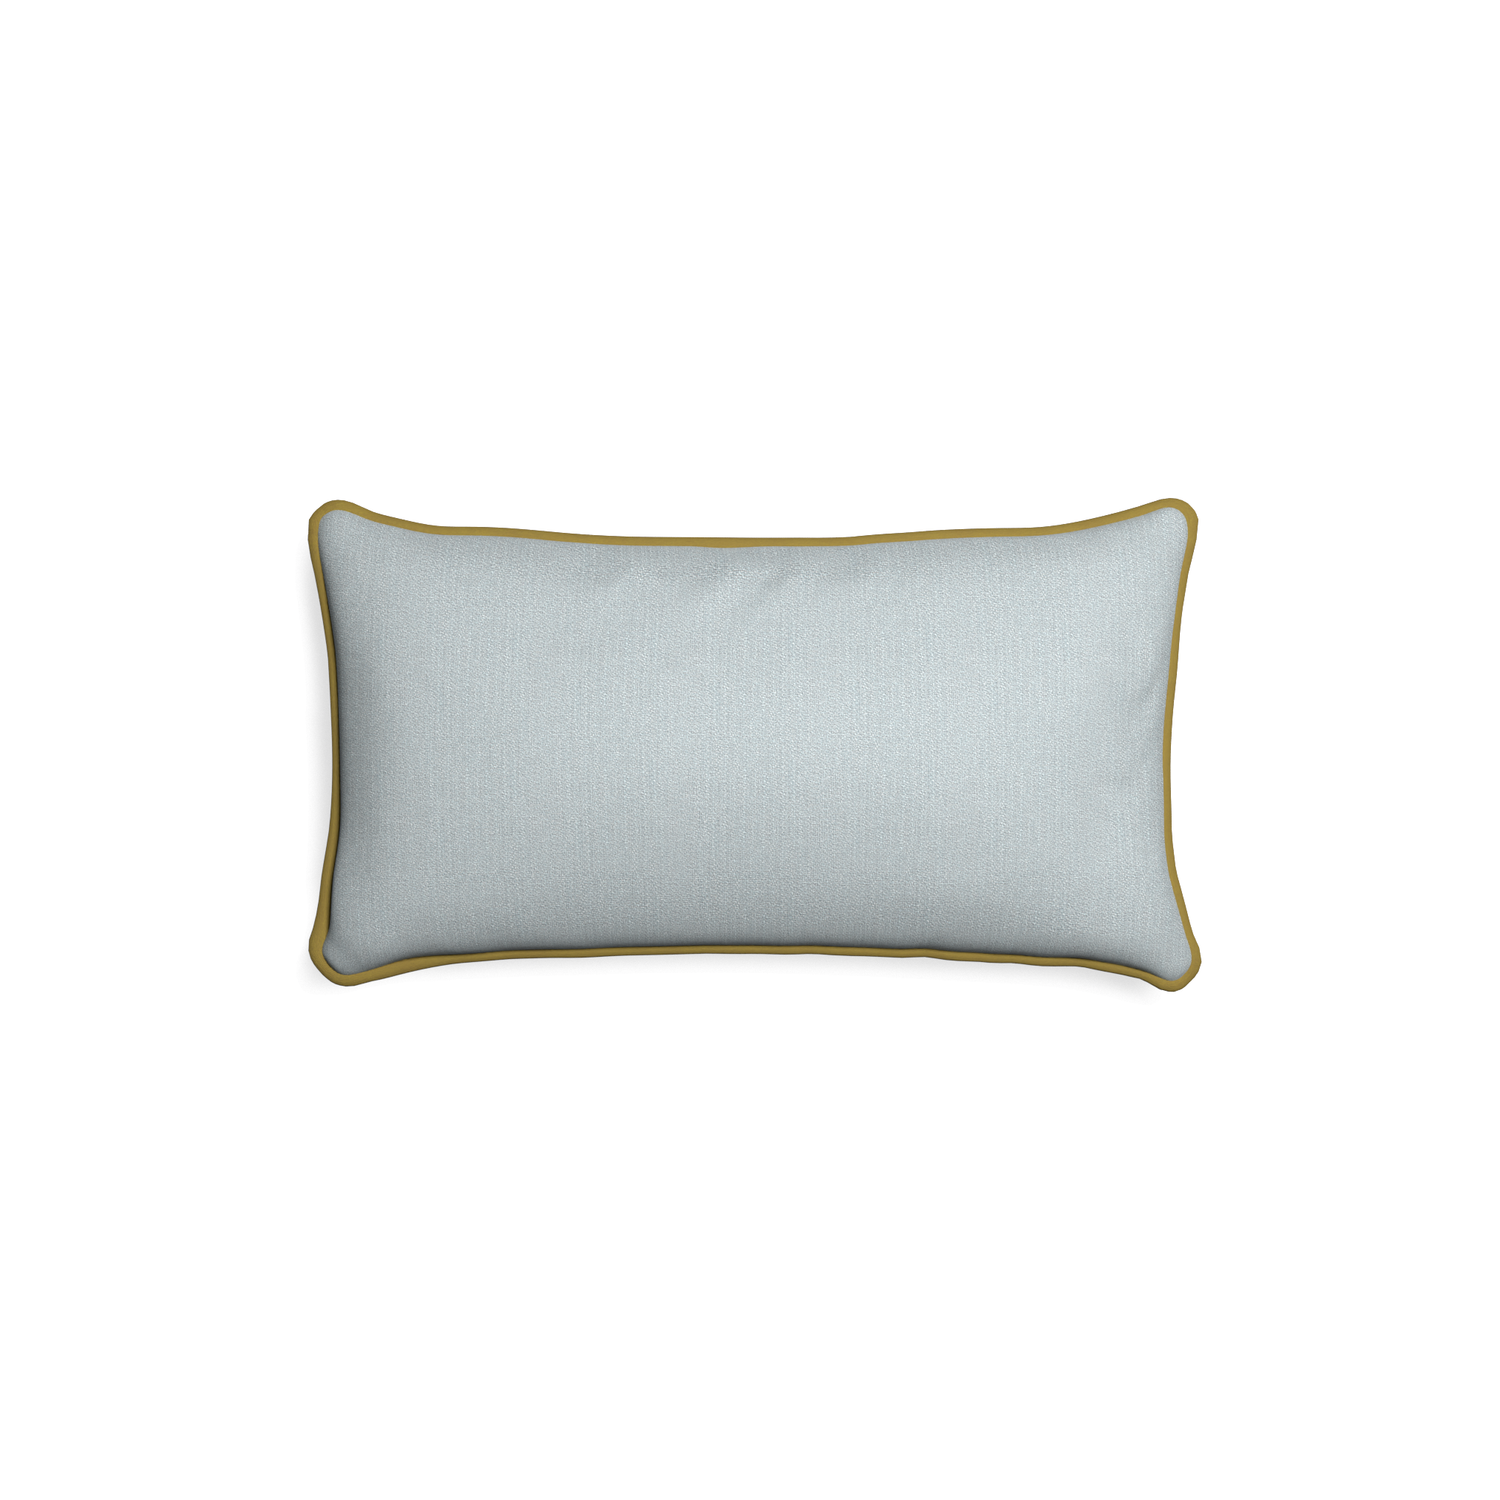 Petite-lumbar sea custom grey bluepillow with c piping on white background